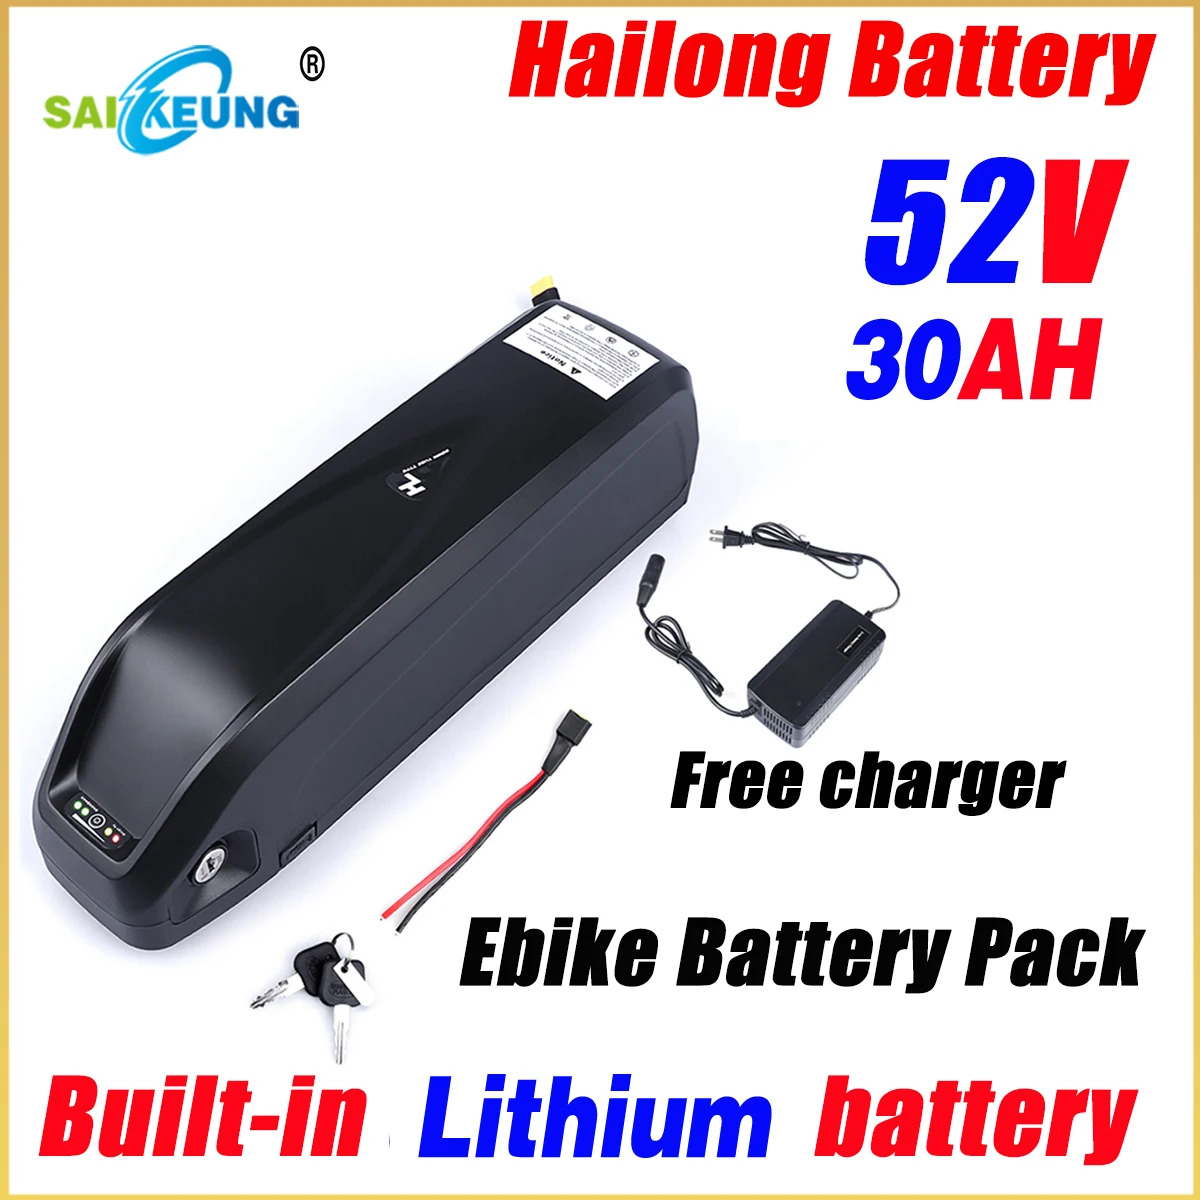 

SAIKEUNG Lithium Battery Pack 52V 20/25/30ah Electric Vehicle Battery Hailong Shell 30A BMS 350W 500W 750W 1000W Bicycle Battery